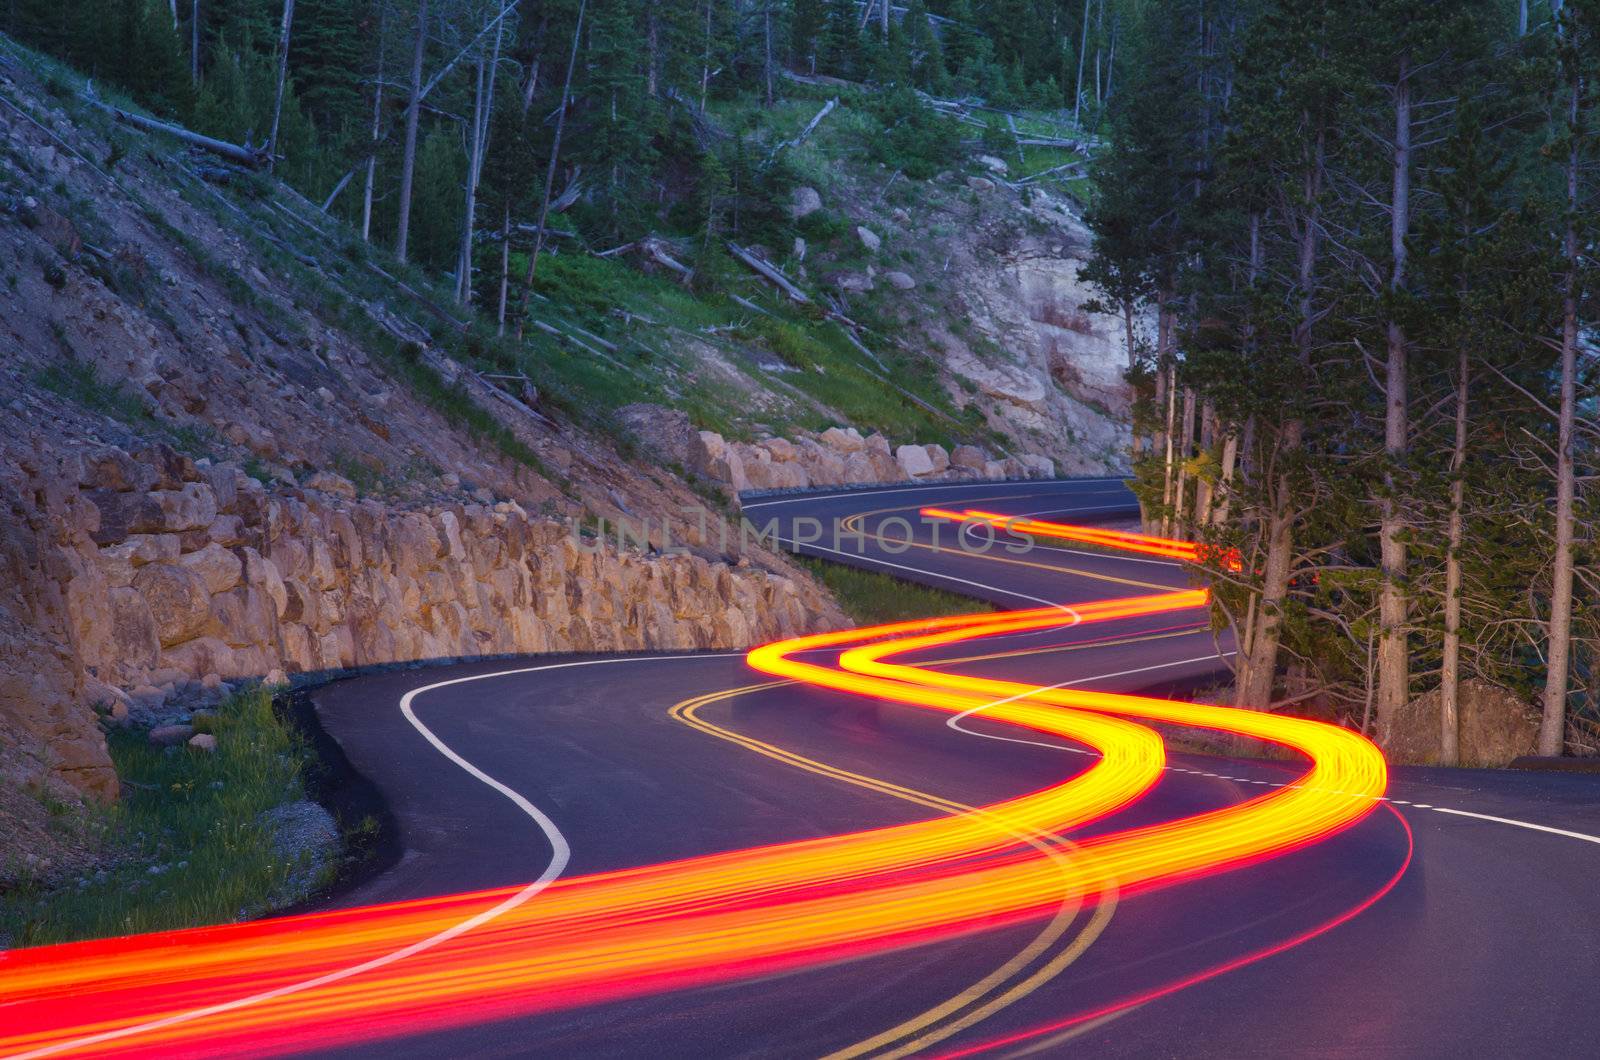 Twilight traffic on the Grand Loop Road in summer, Yellowstone National Park, Park County, Wyoming, USA by CharlesBolin